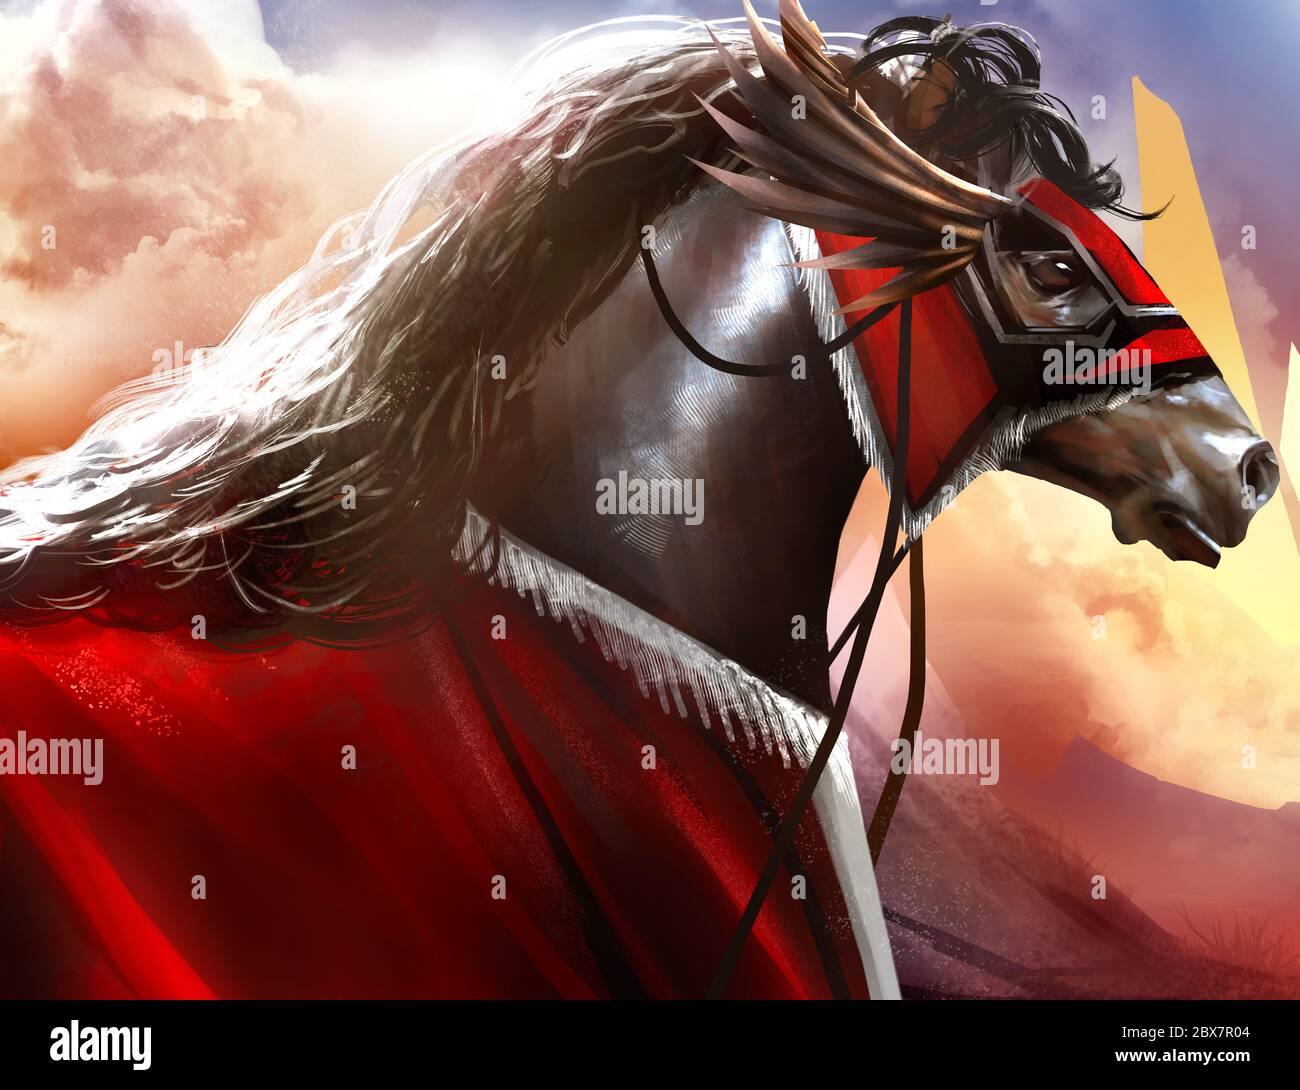 Fantasy battle horse with red hood profile and hills nature background art  illustration Stock Photo - Alamy